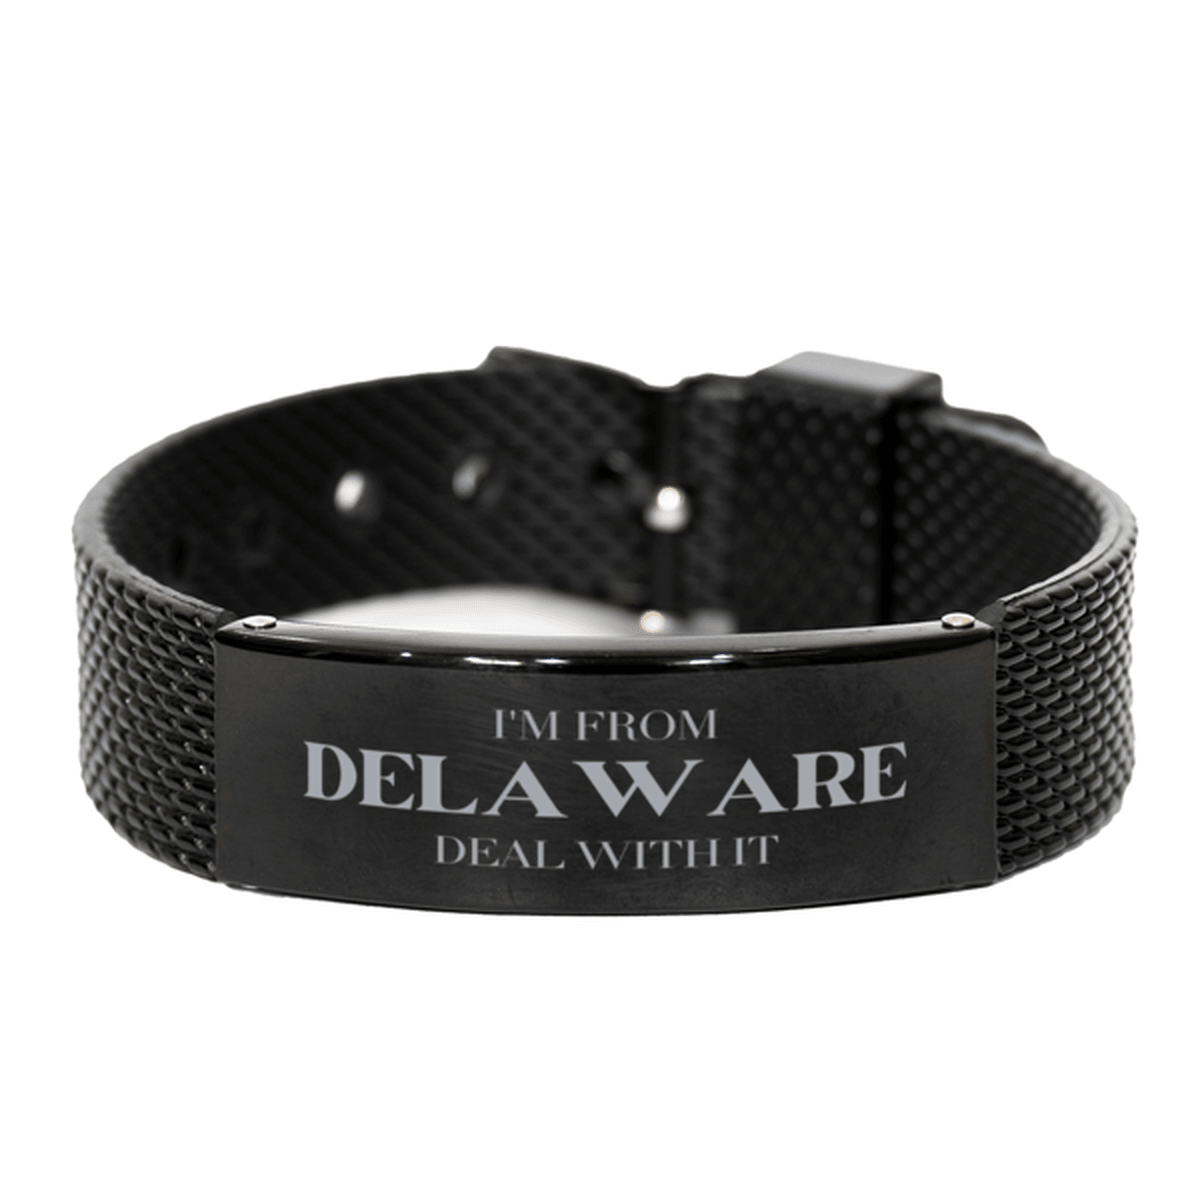 I'm from Delaware, Deal with it, Proud Delaware State Gifts, Delaware Black Shark Mesh Bracelet Gift Idea, Christmas Gifts for Delaware People, Coworkers, Colleague - Mallard Moon Gift Shop